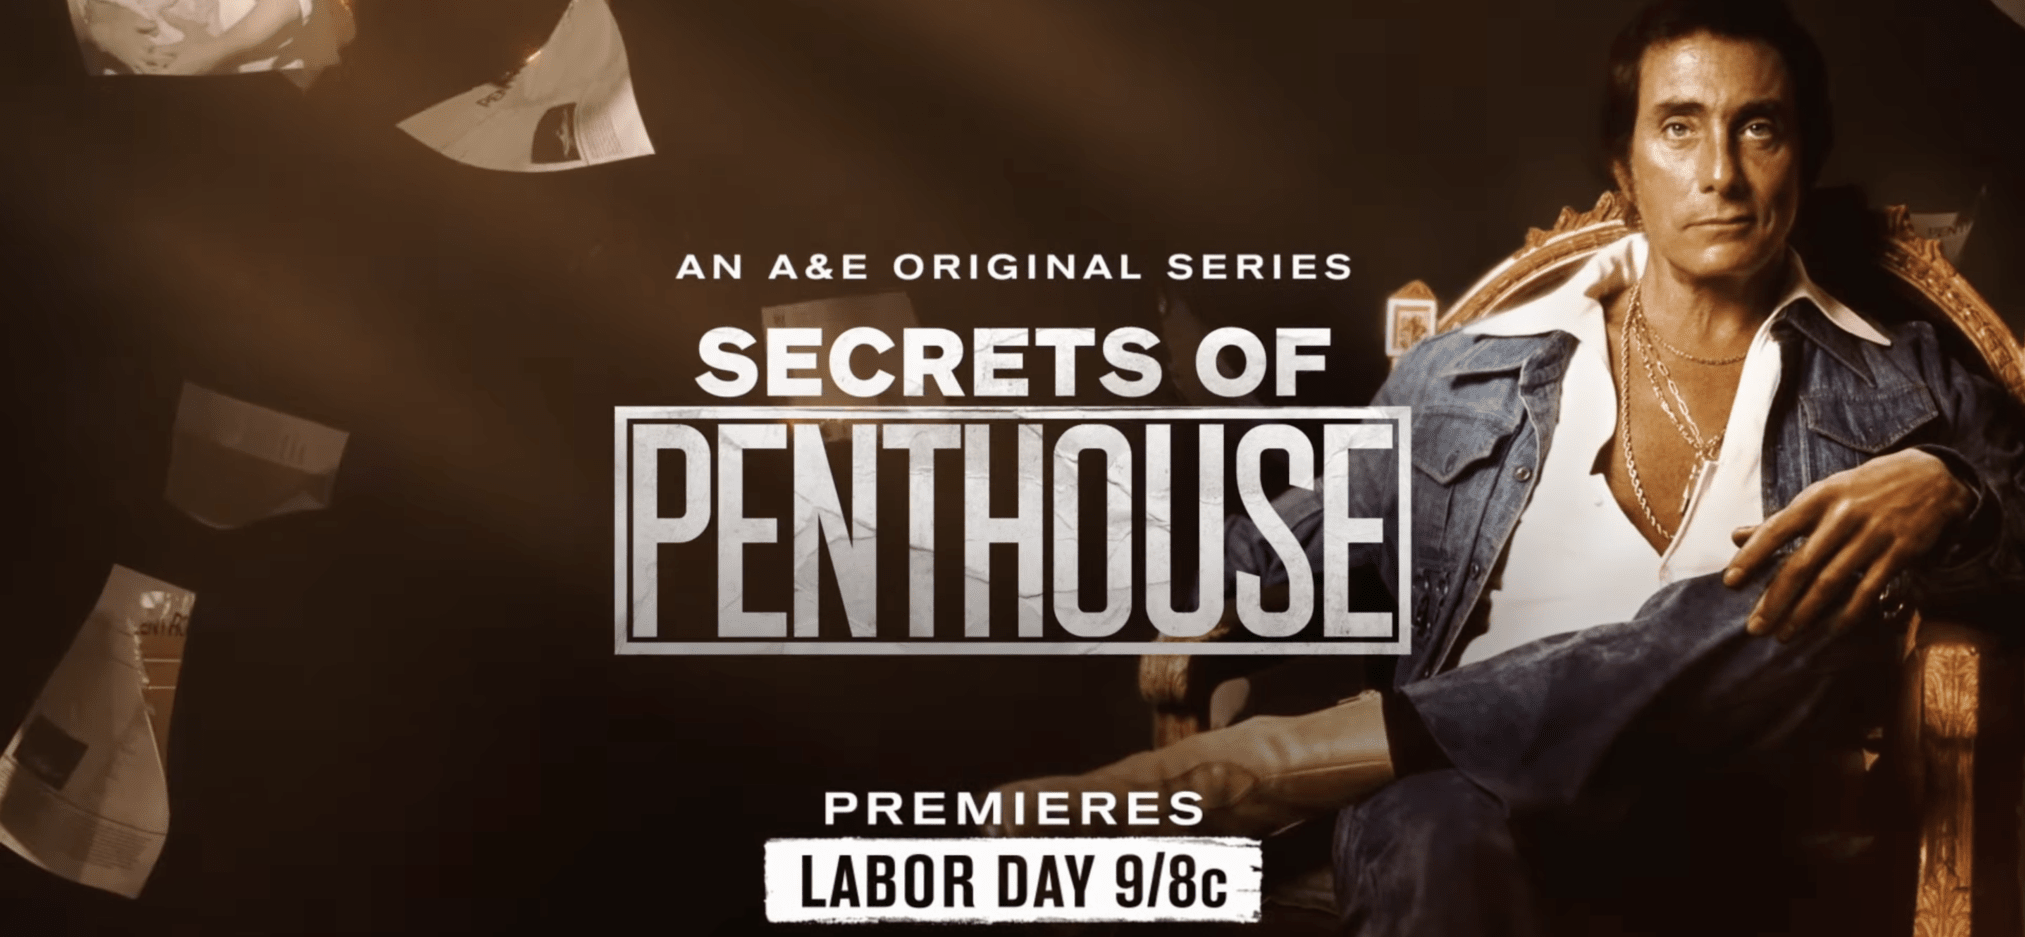 Penthouse Docuseries To Expose ‘Beastiality’ And ‘Golden Showers’